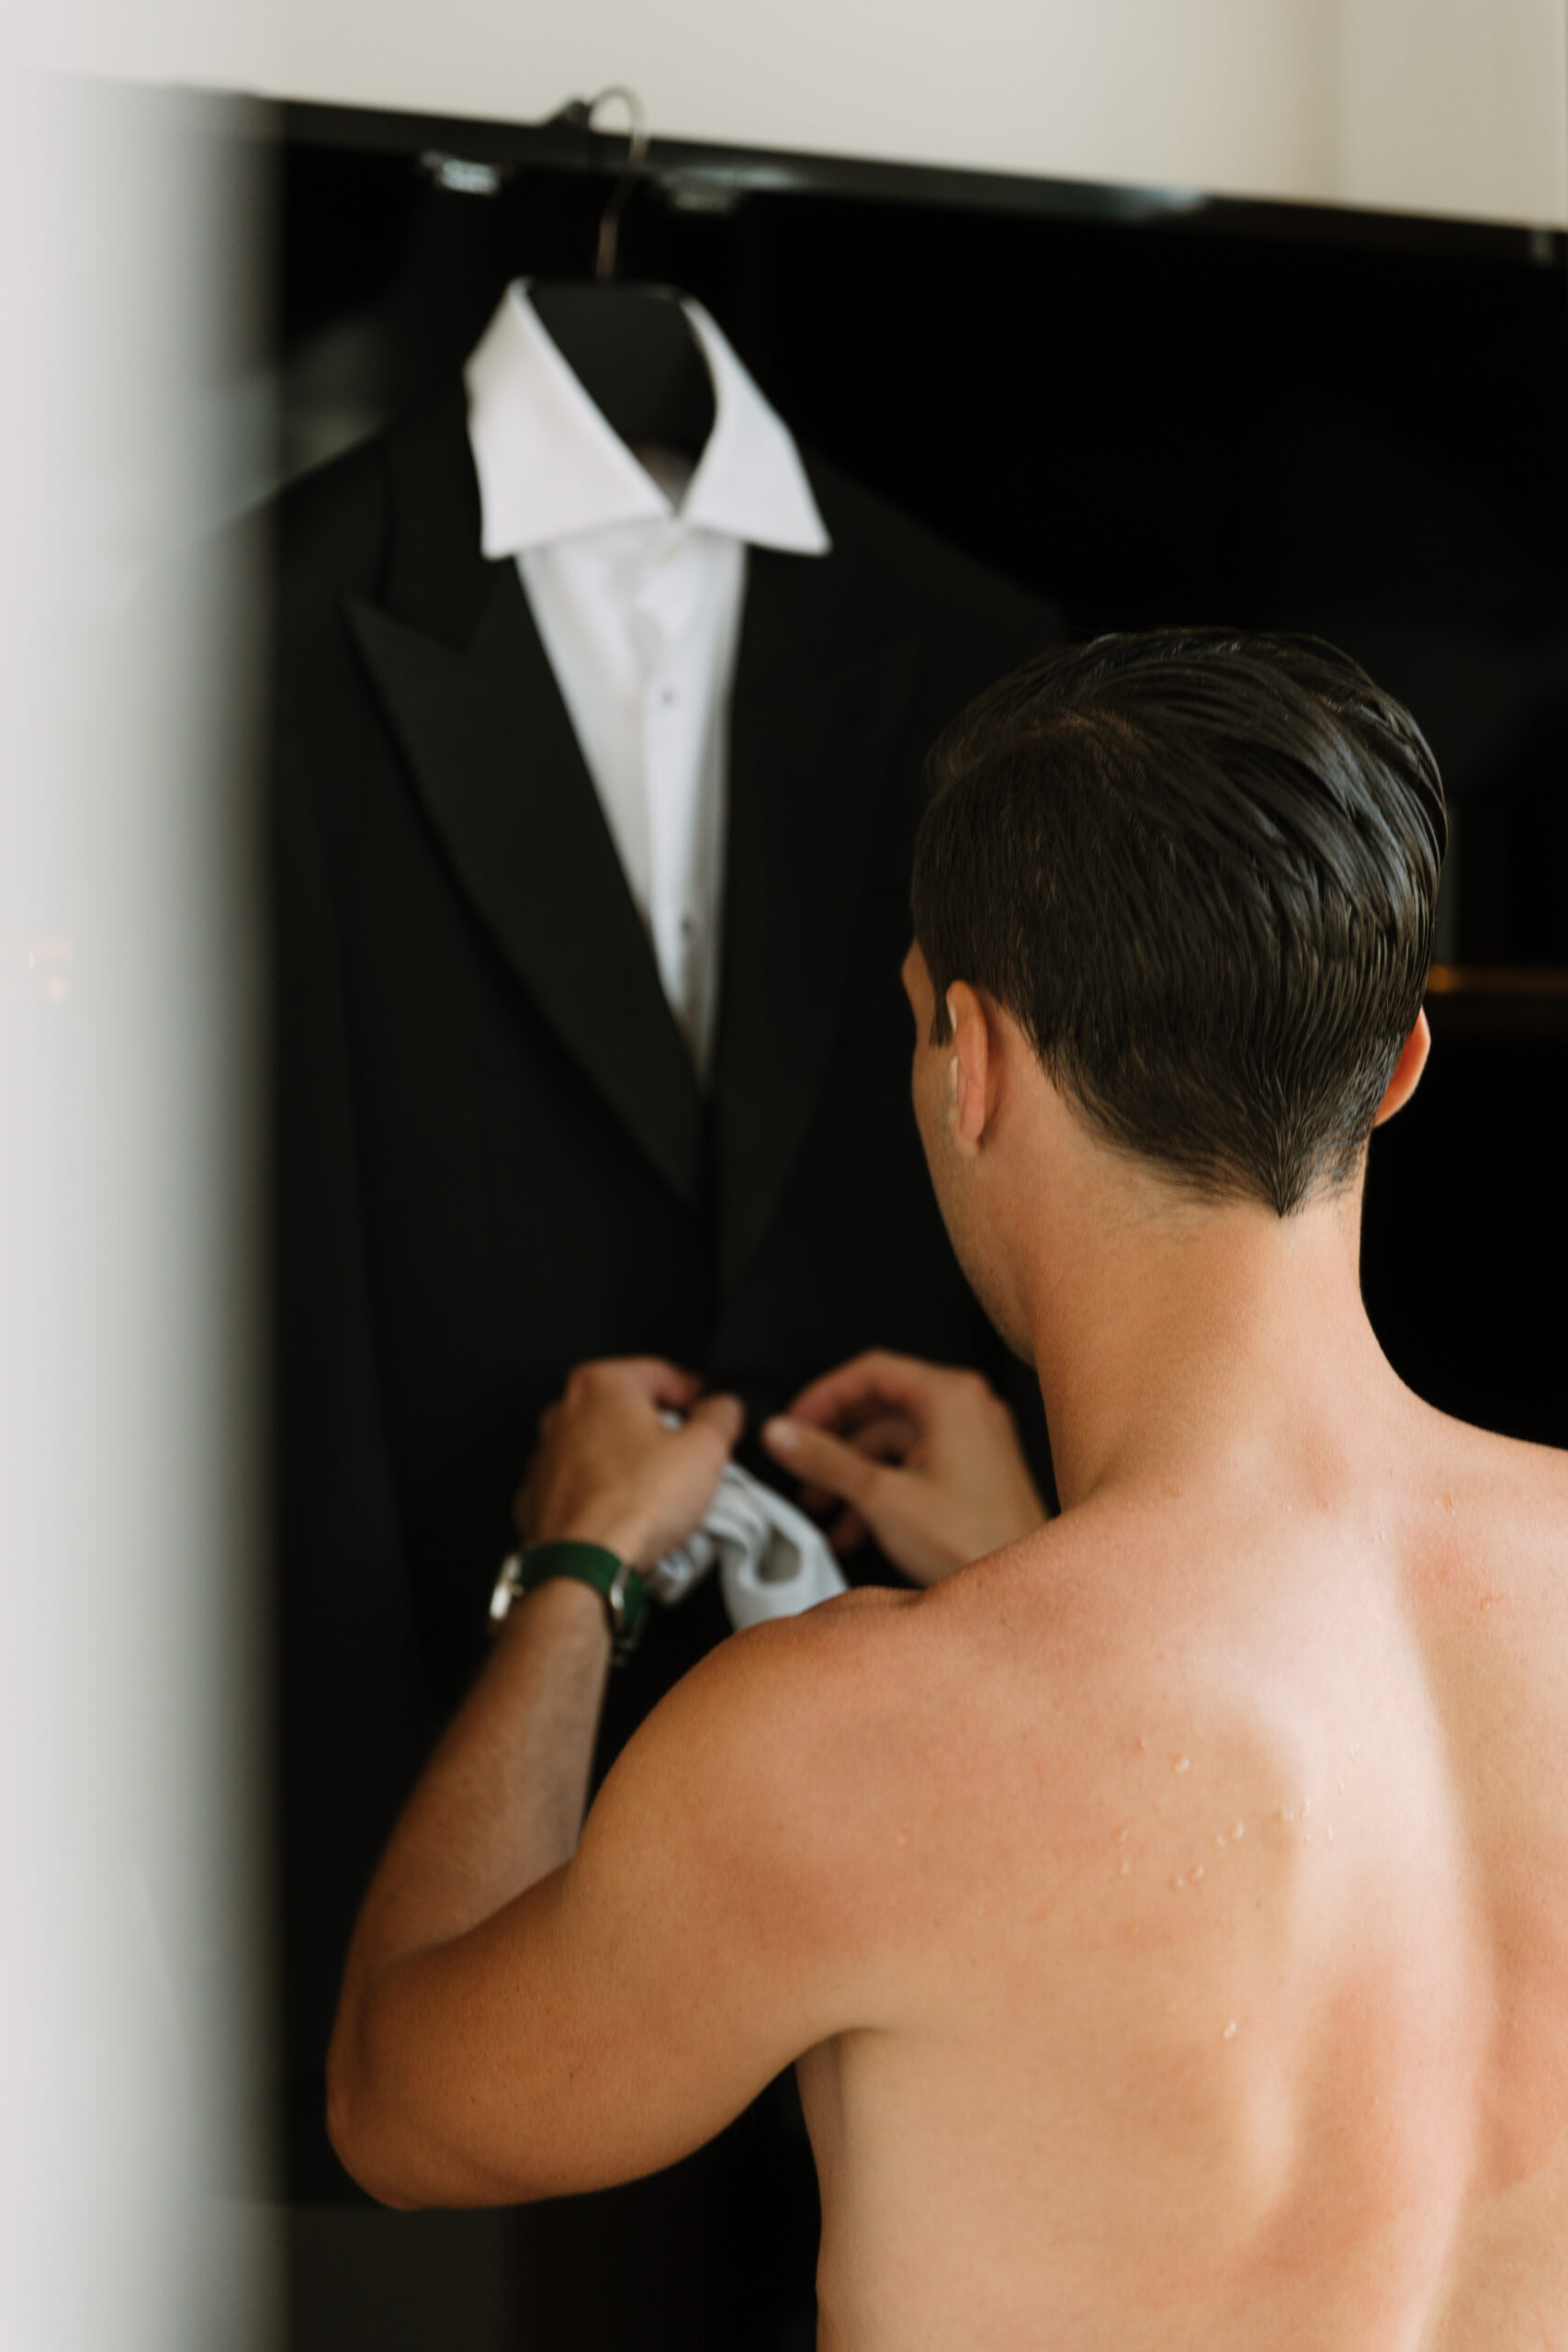 shirtless groom pulling his tux out of the wardrobe